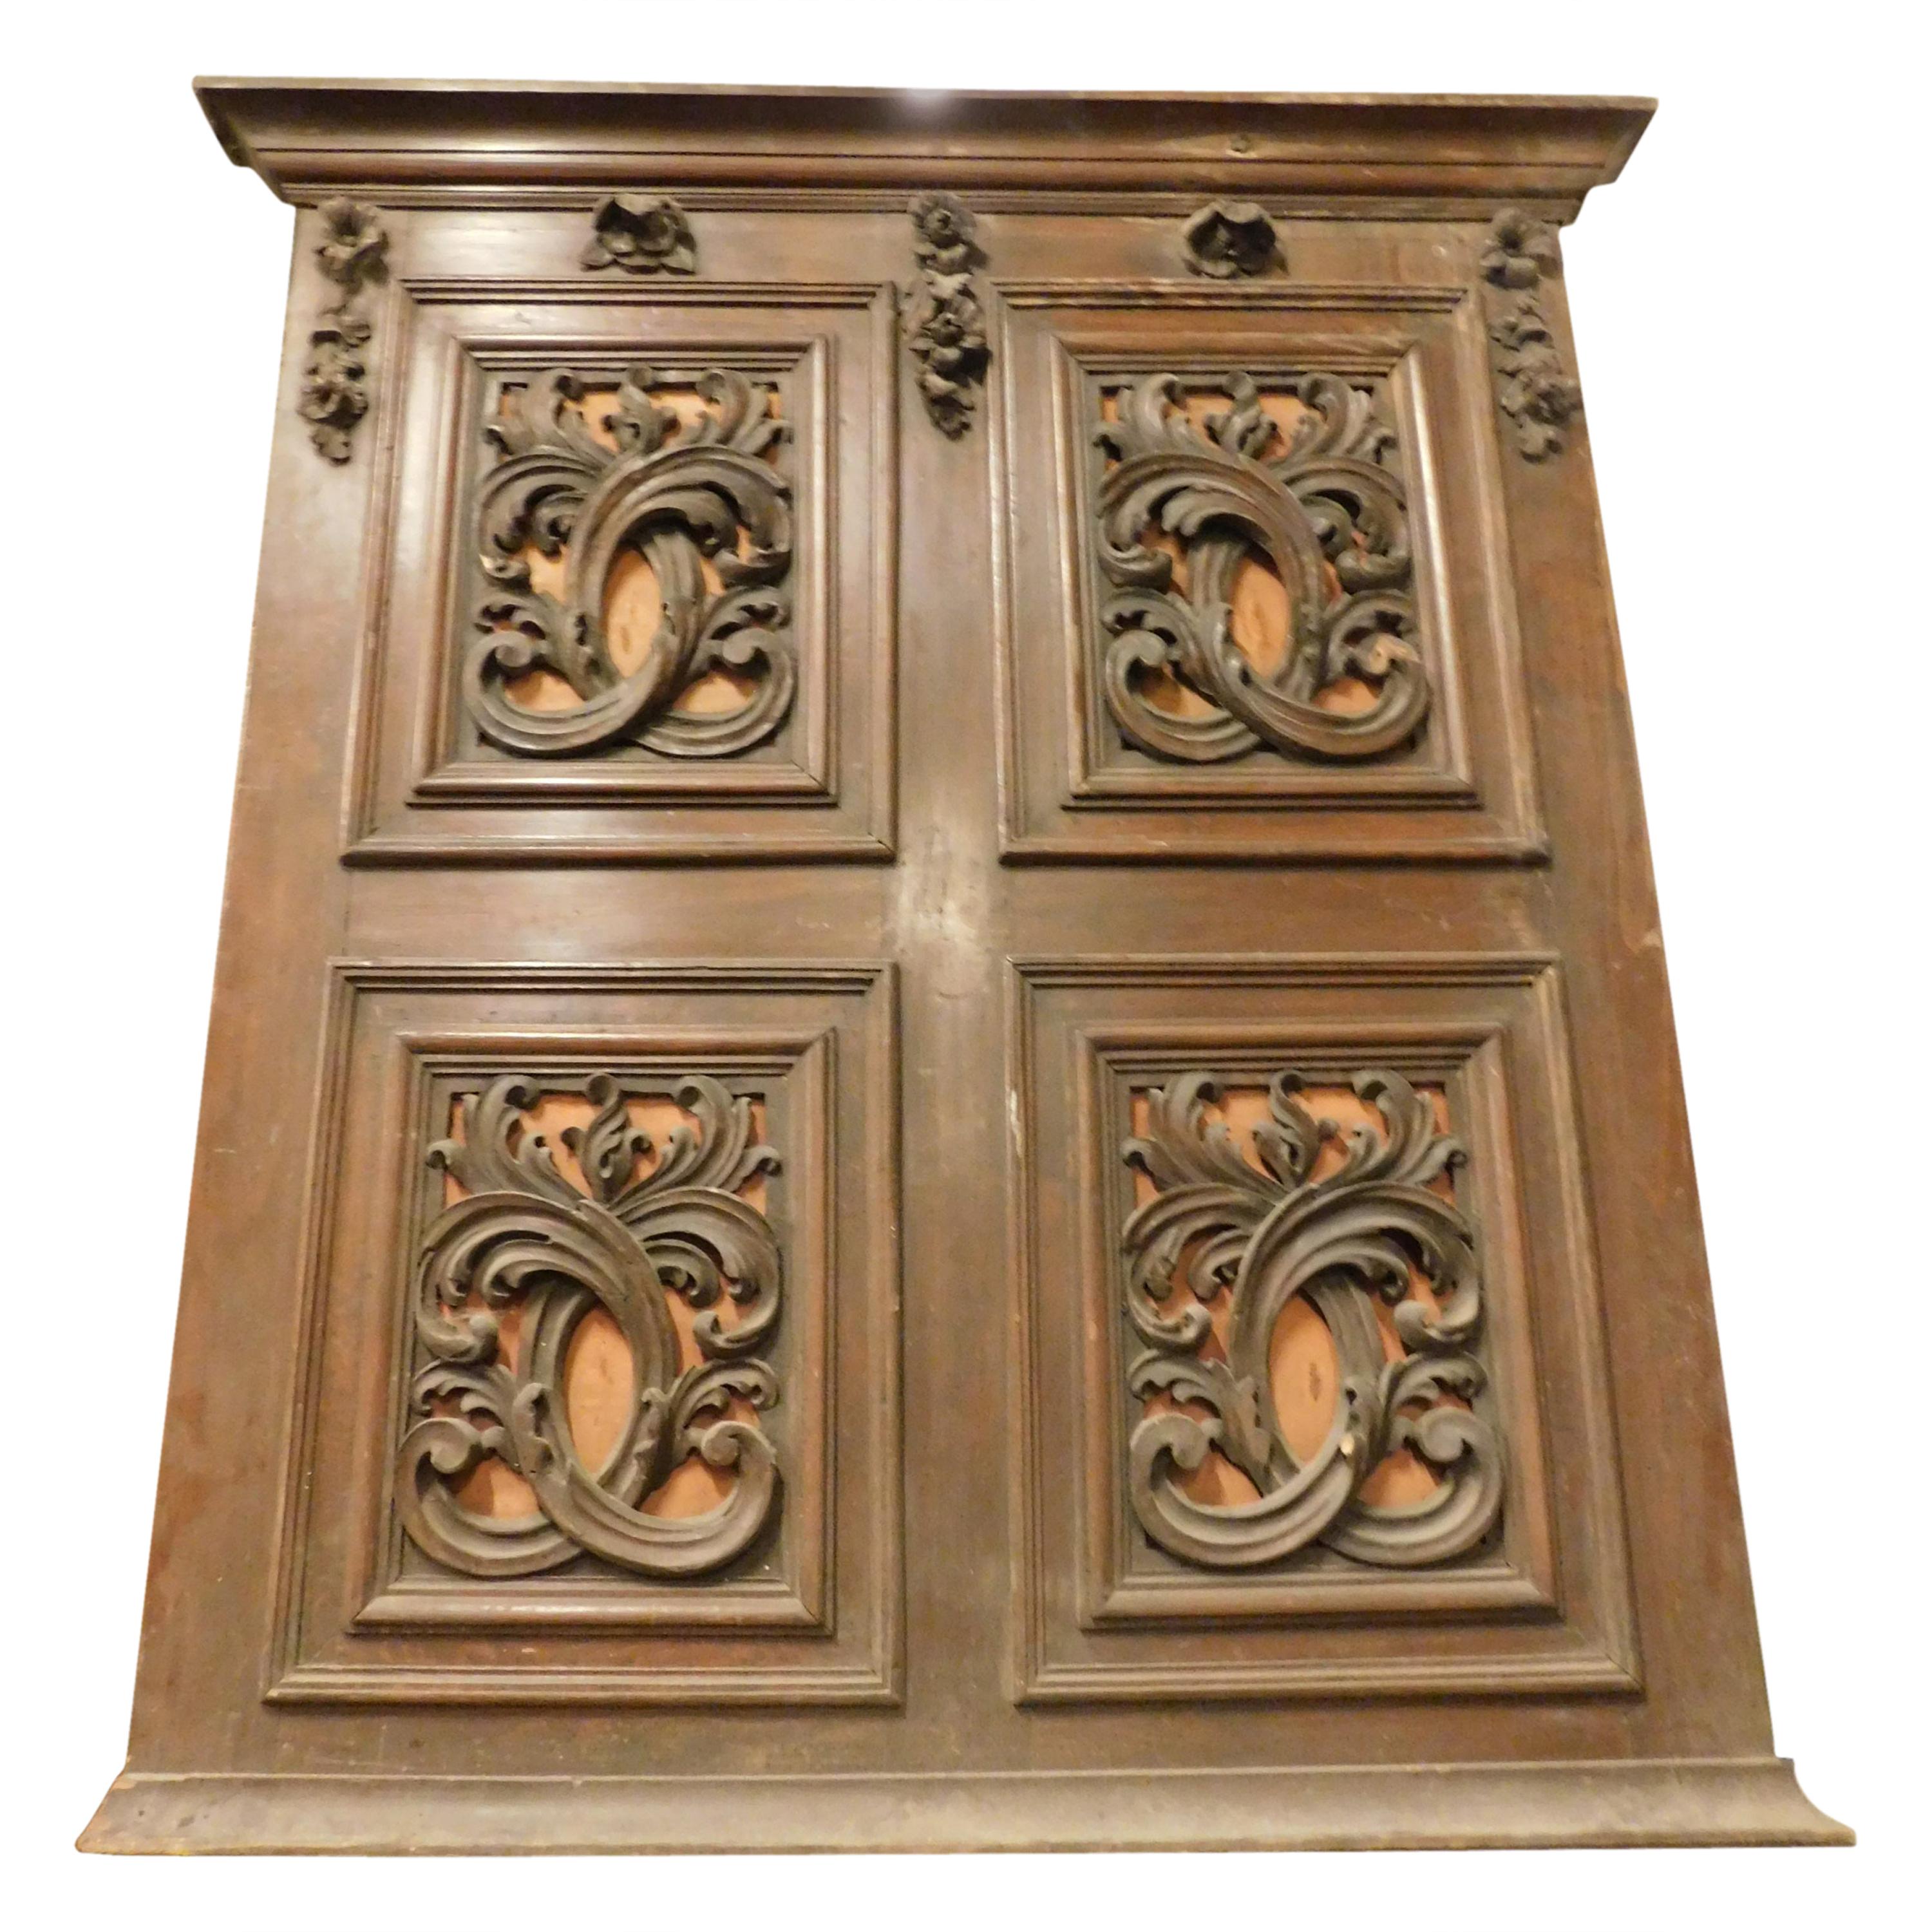 Antique Brown and Orange Panel, Headboard, with 4 Floral Carved Panels, 1900 